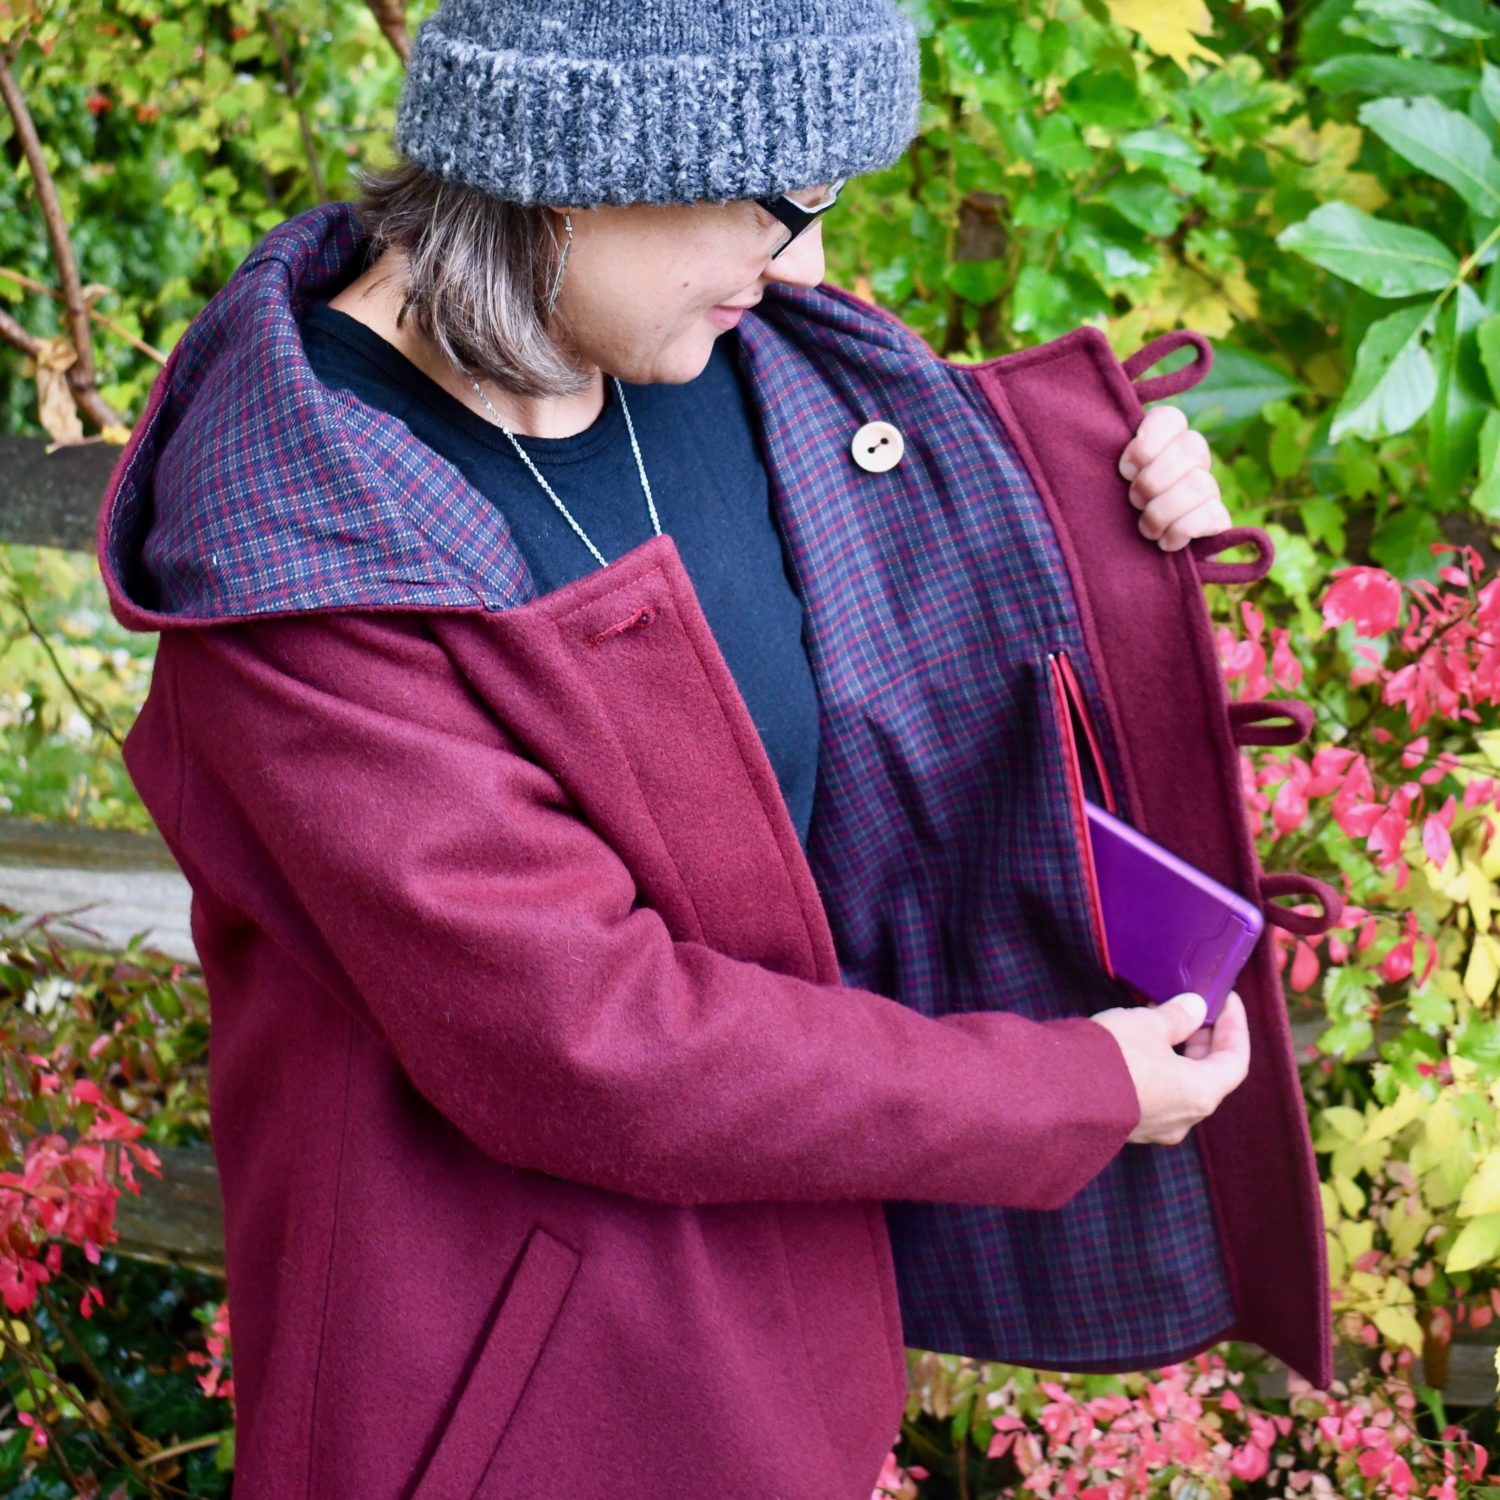 Adding an Interior Pocket to the Ruby Peacoat - 5 out of 4 Patterns